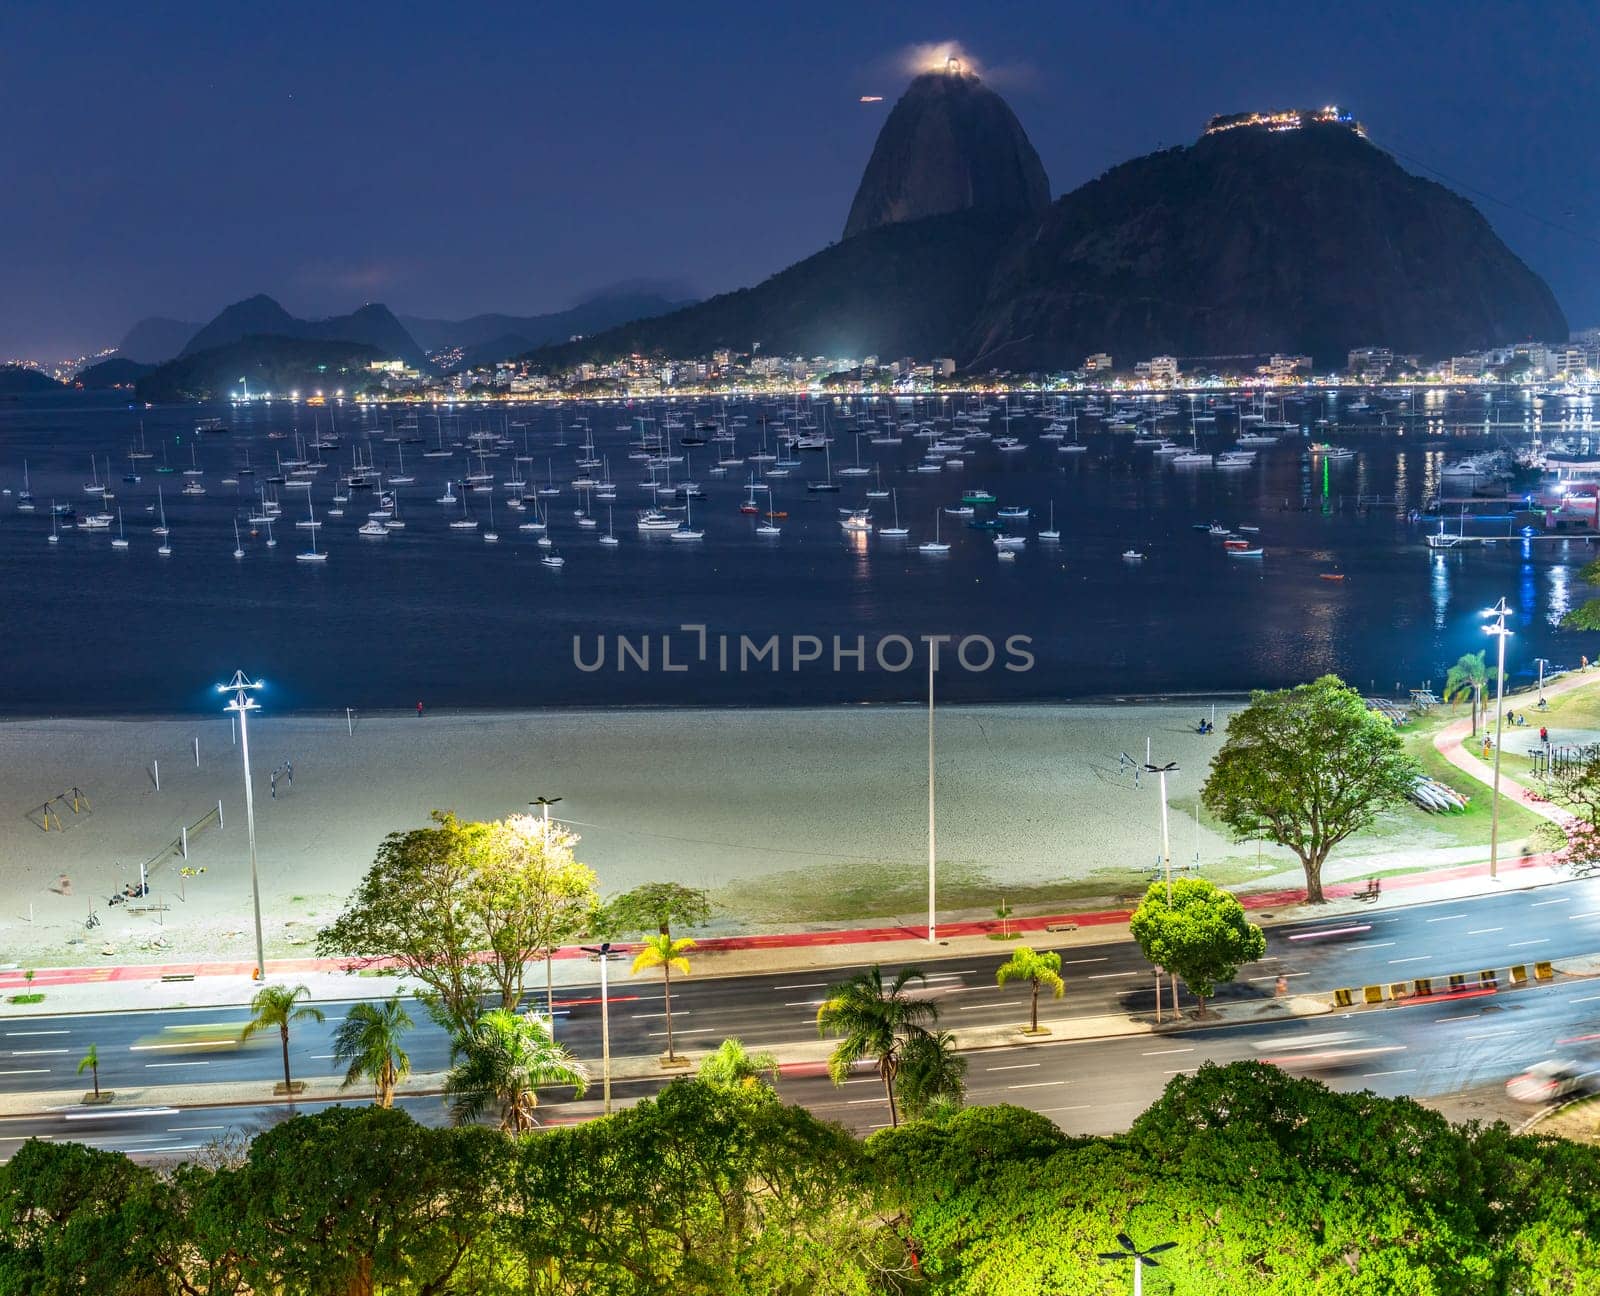 Vibrant Night Scene Overlooking the Bay and City Lights by FerradalFCG